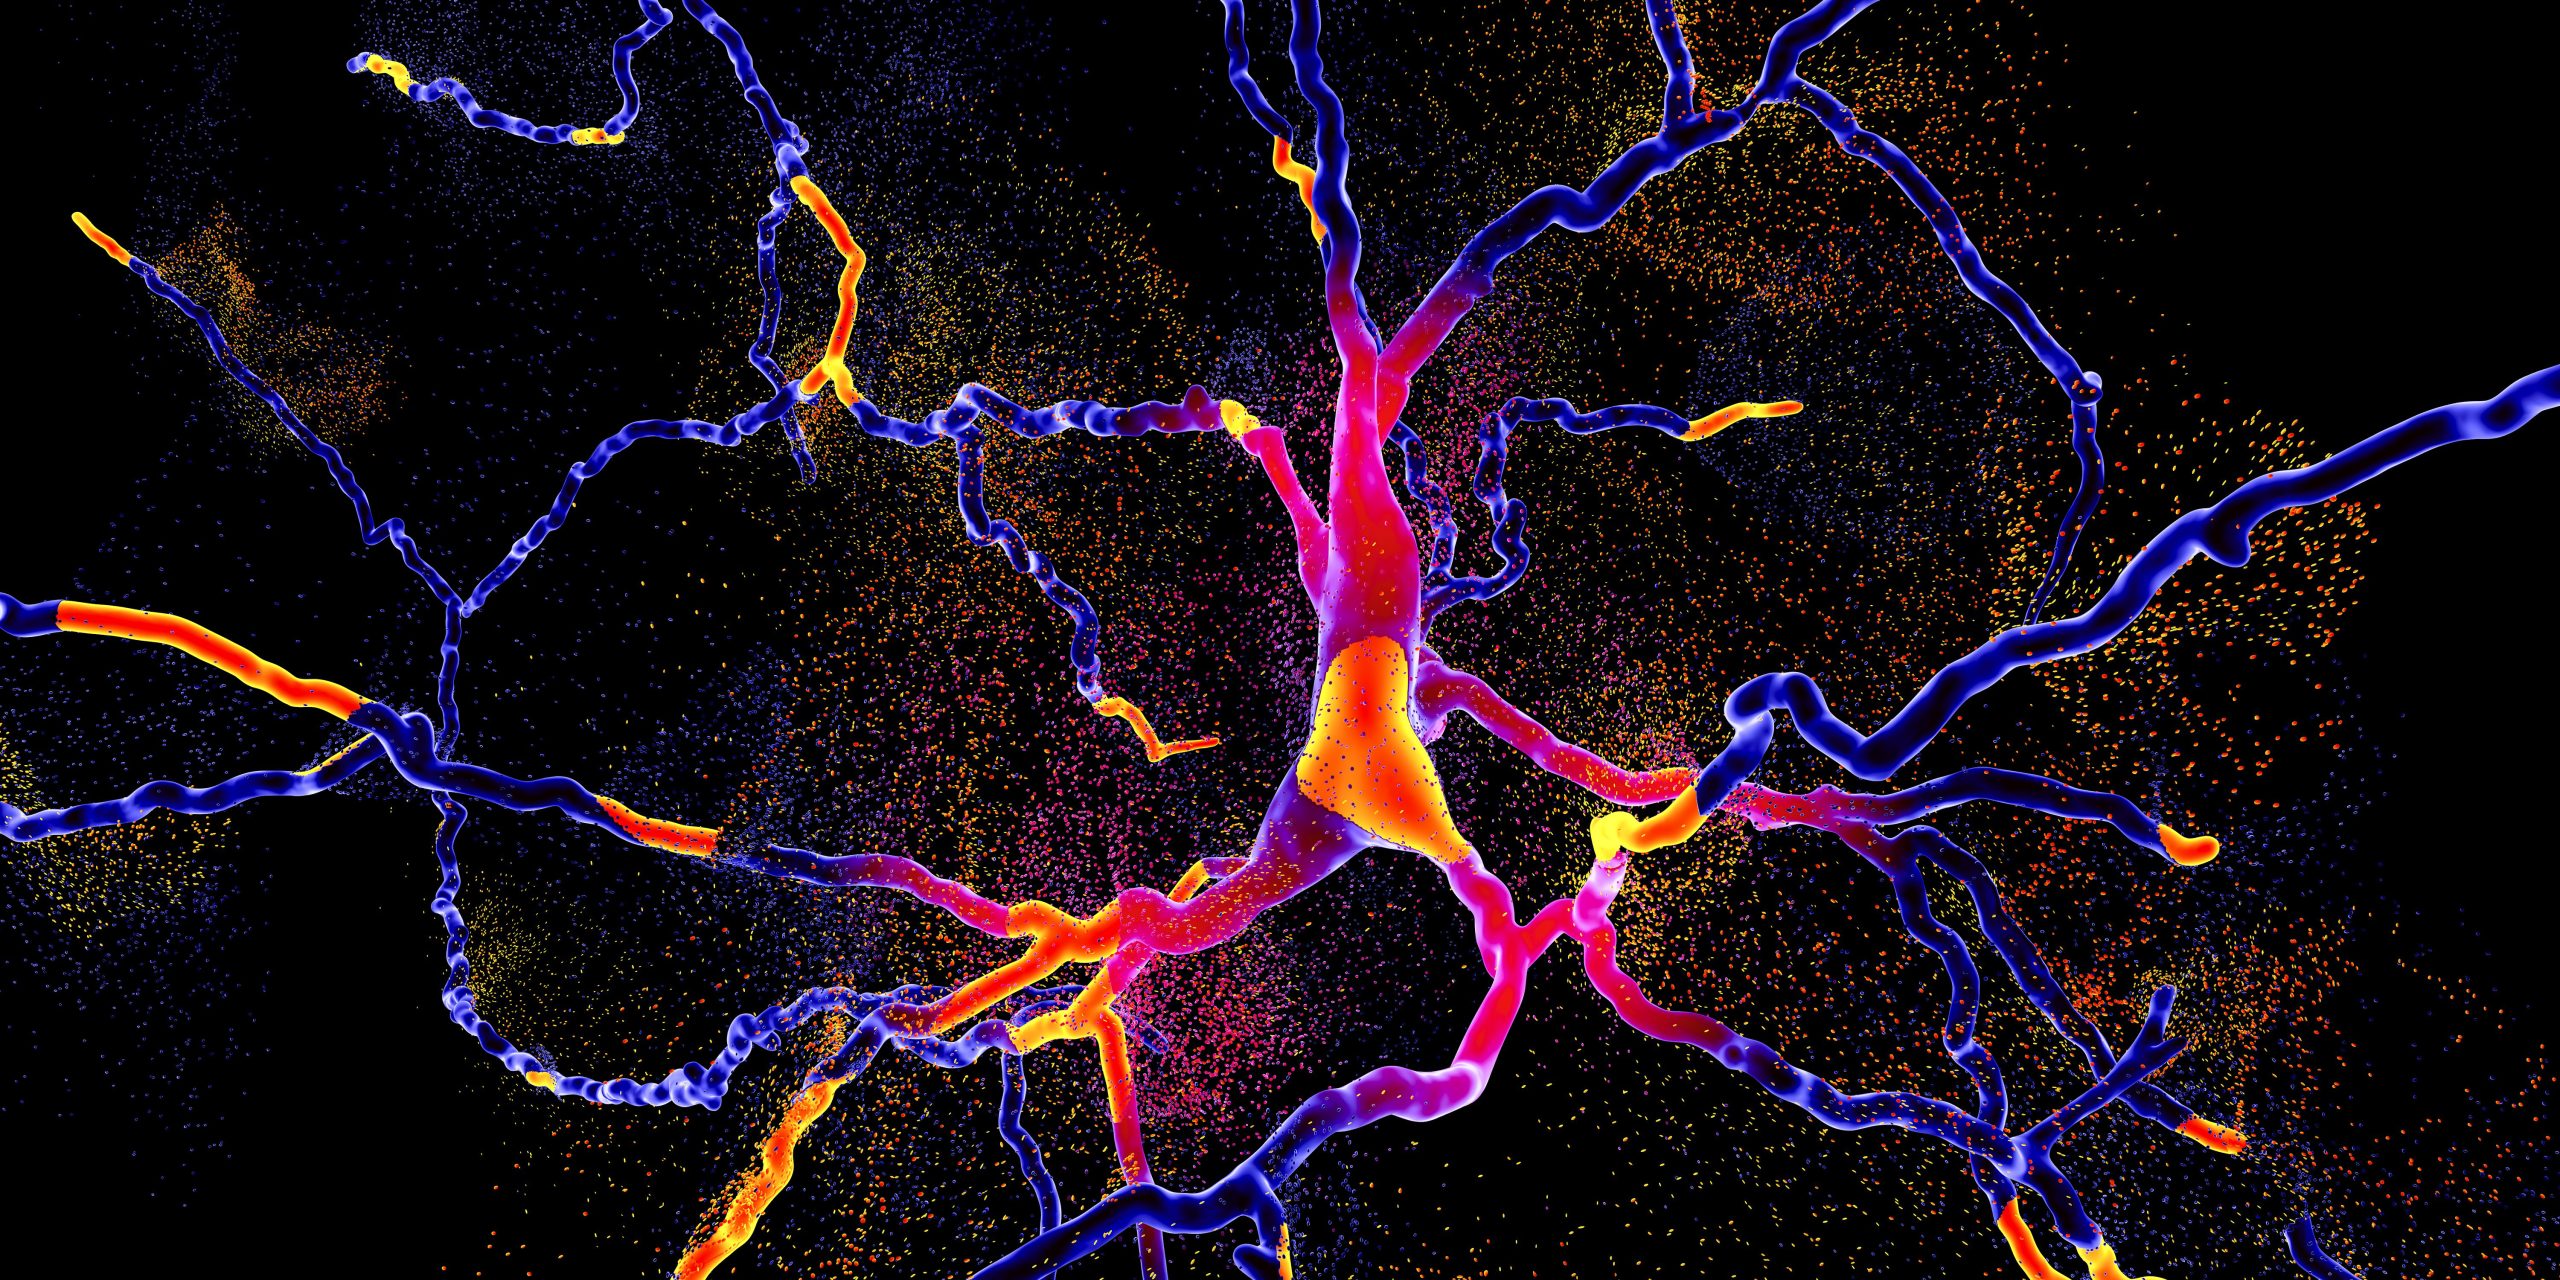 Researchers at the University of Wisconsin-Madison report that they have identified a protein that allows for the production of norepinephrine neurons